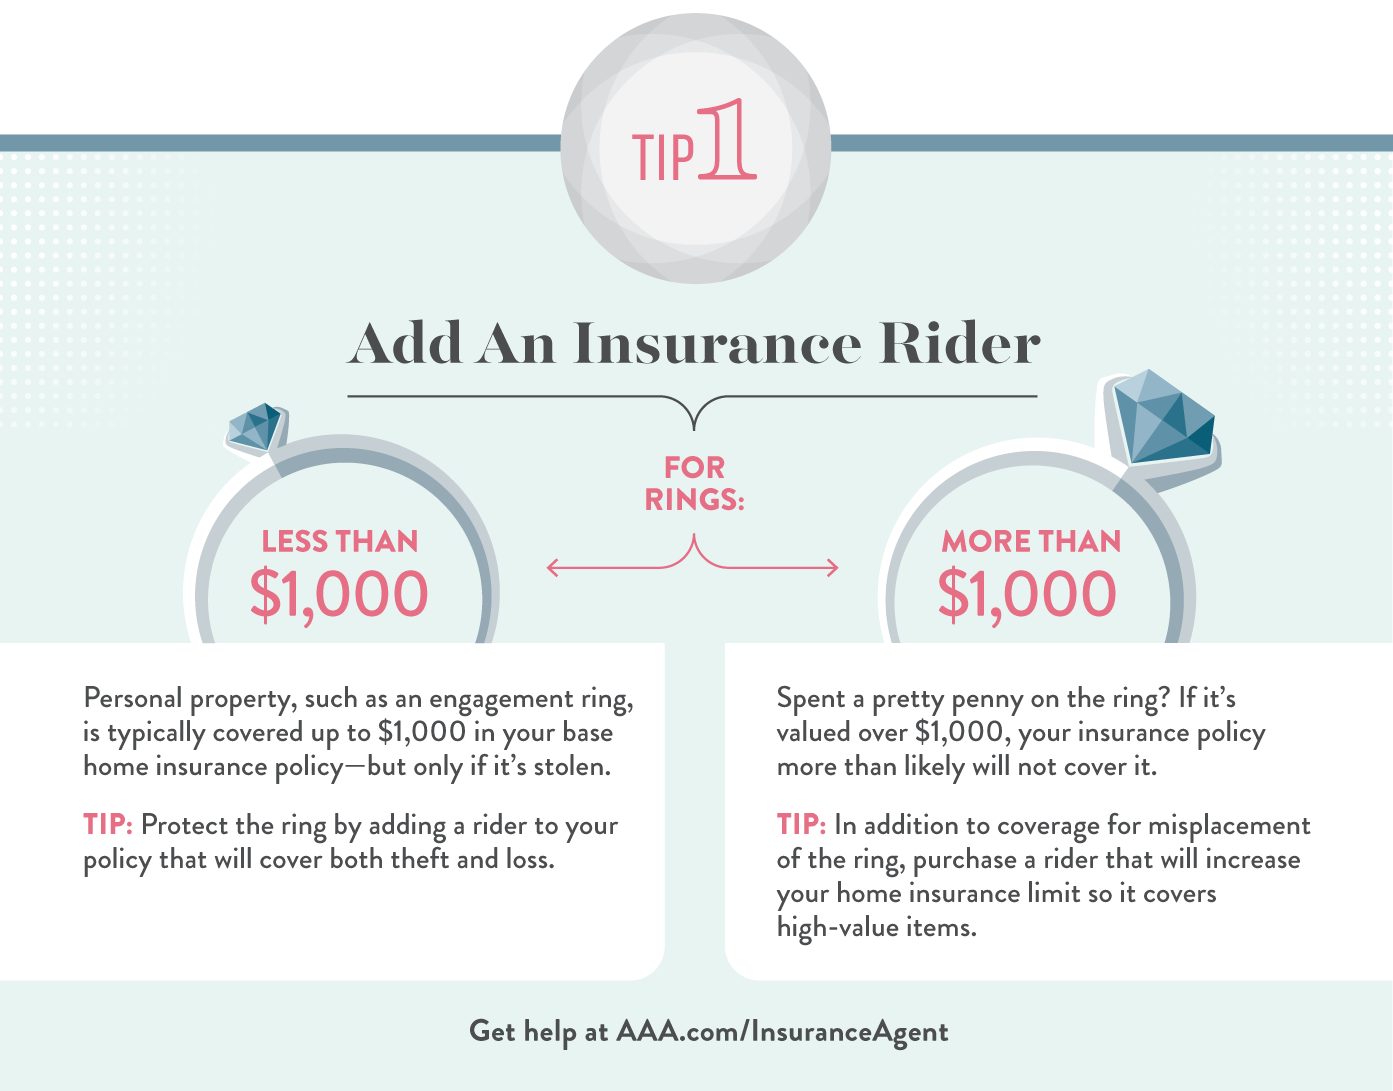 tips on adding insurance after marriage